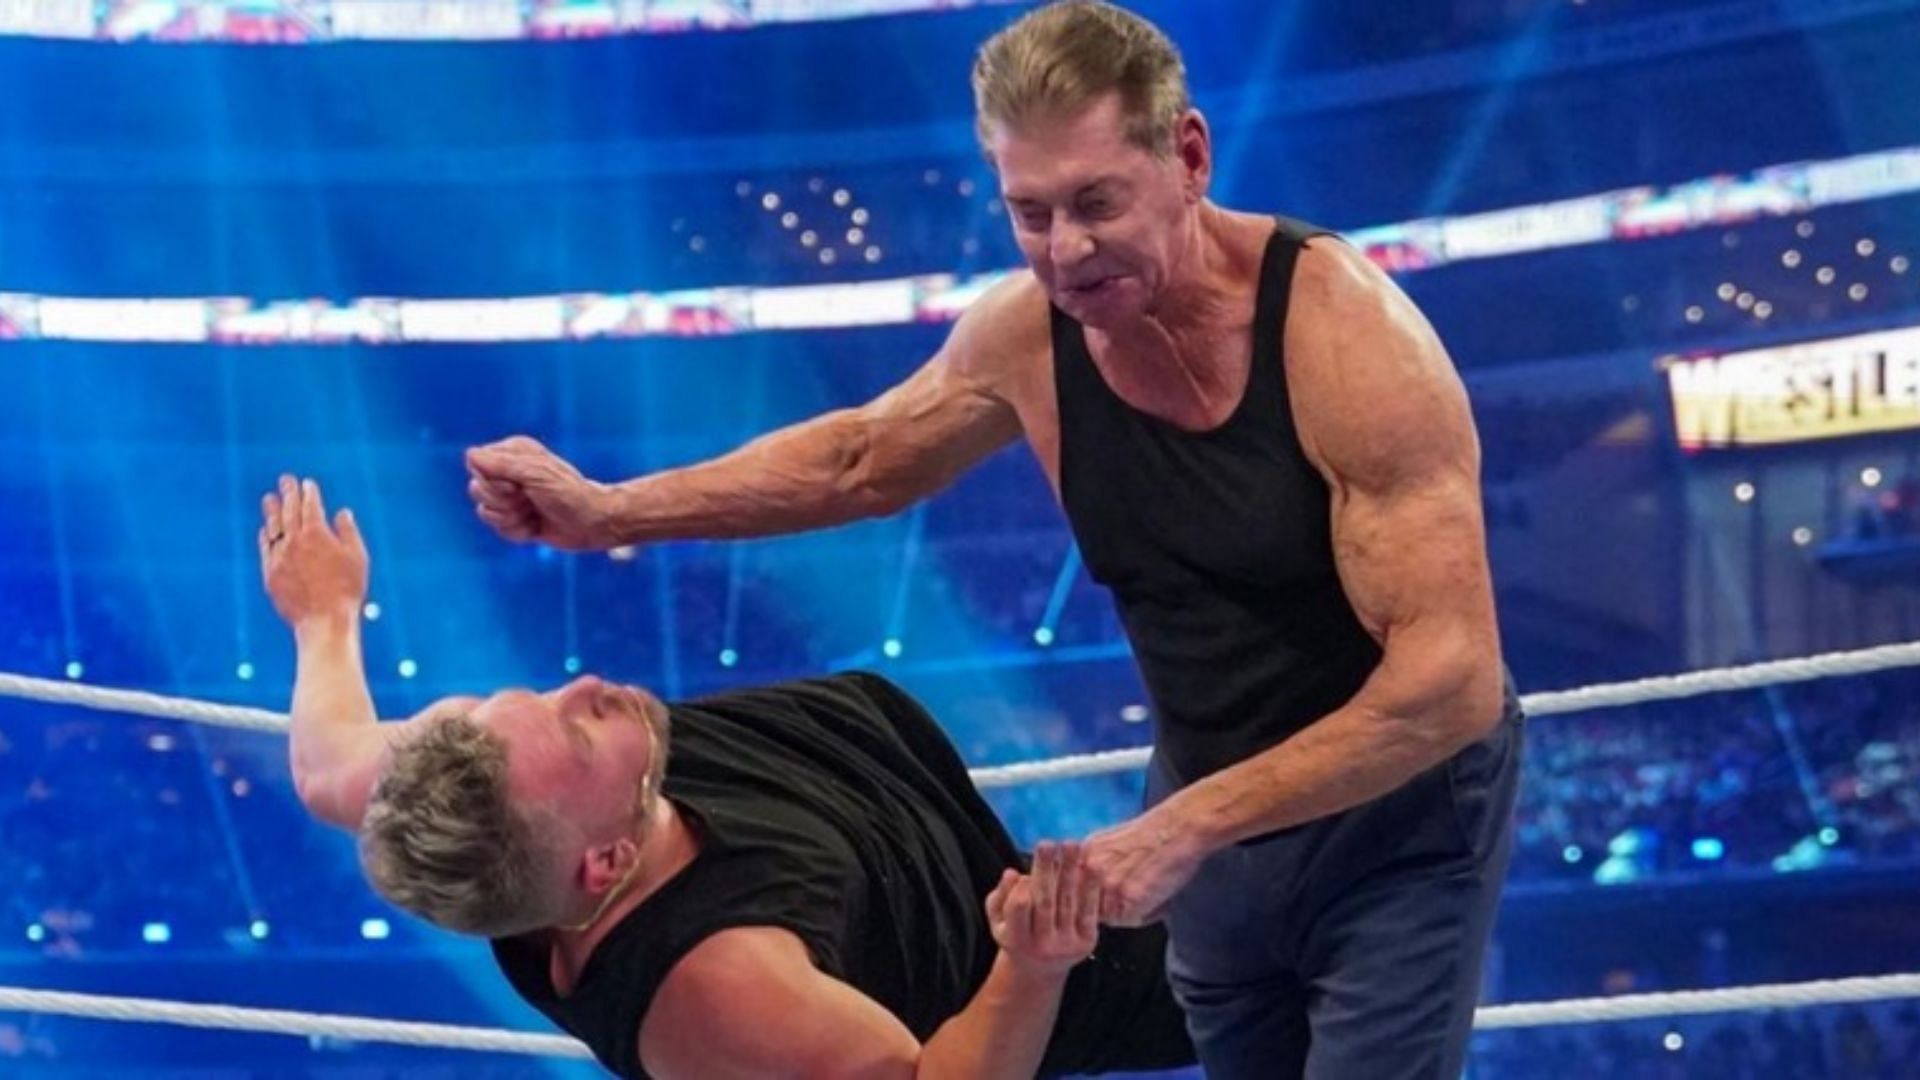 Vince McMahon defeated Pat McAfee in an impromptu match at WWE WrestleMania 38